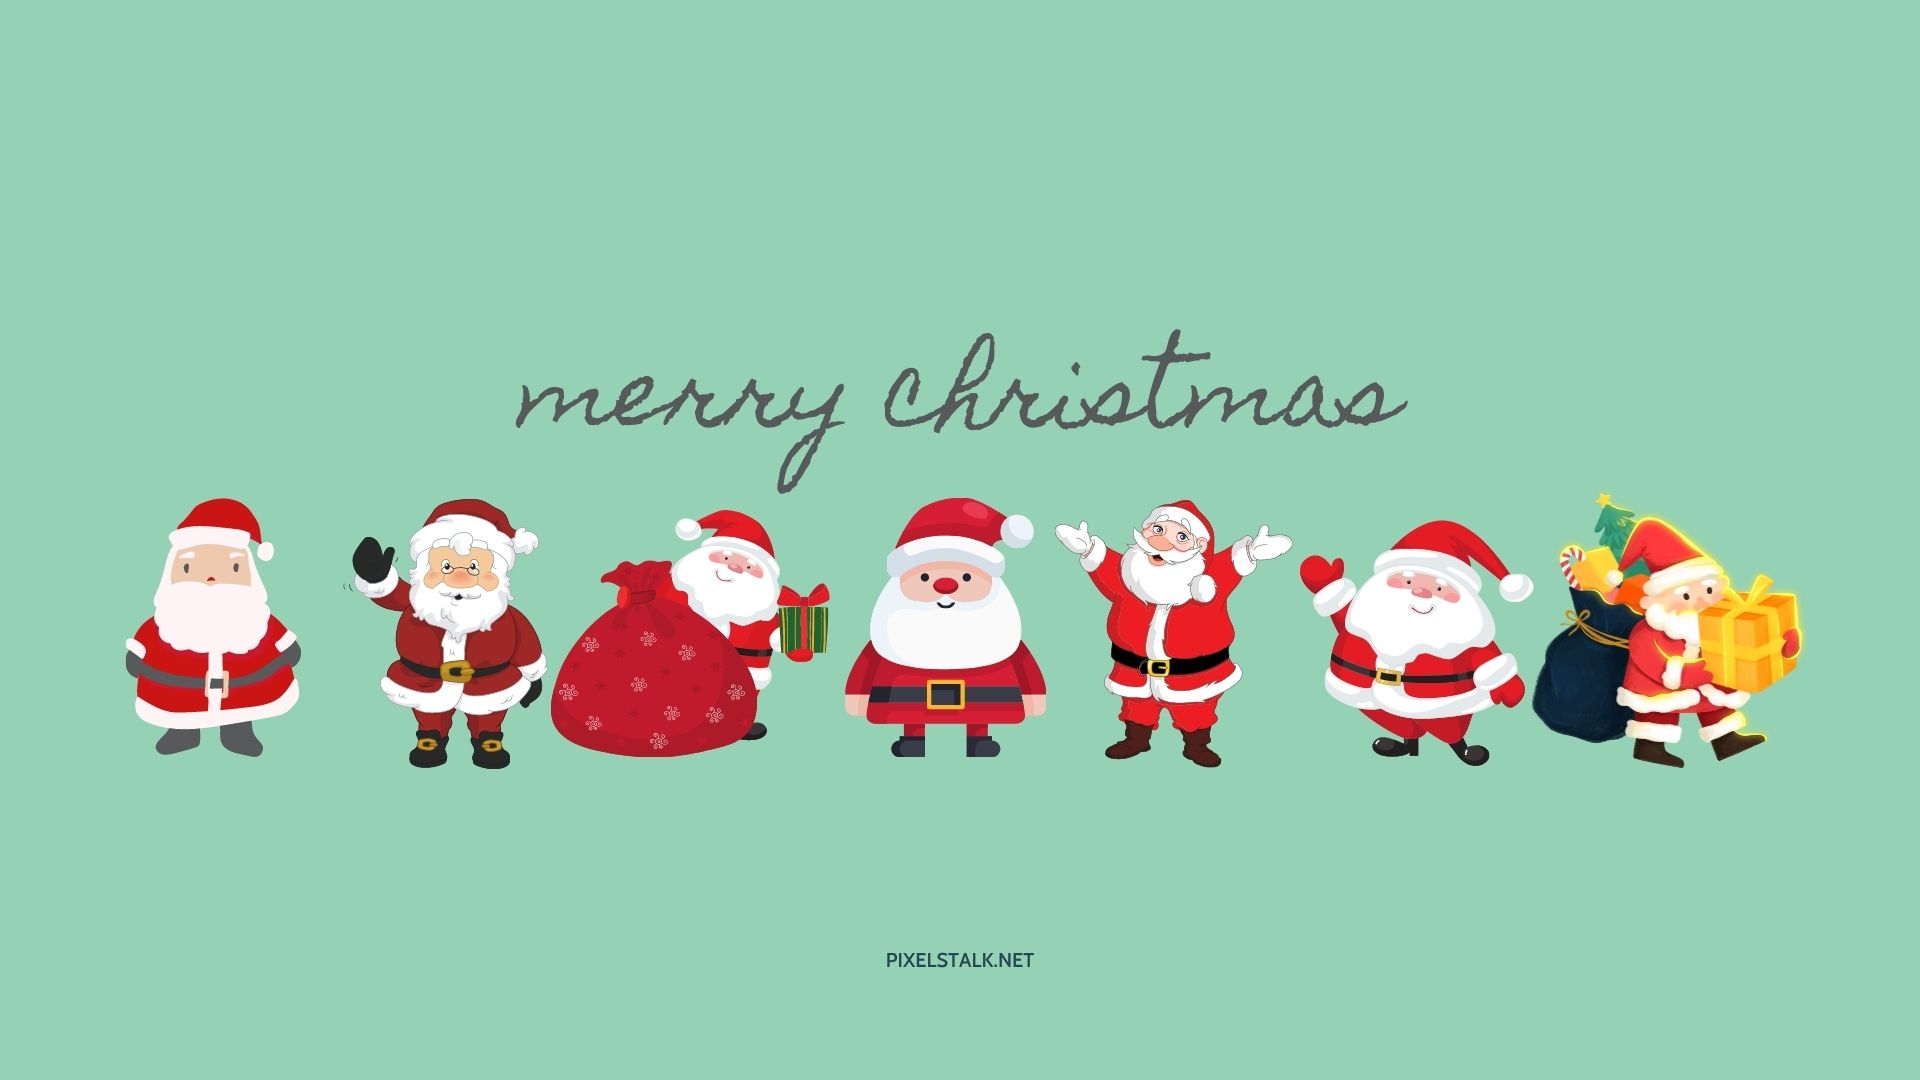 Pretty Christmas Wallpapers 64 pictures